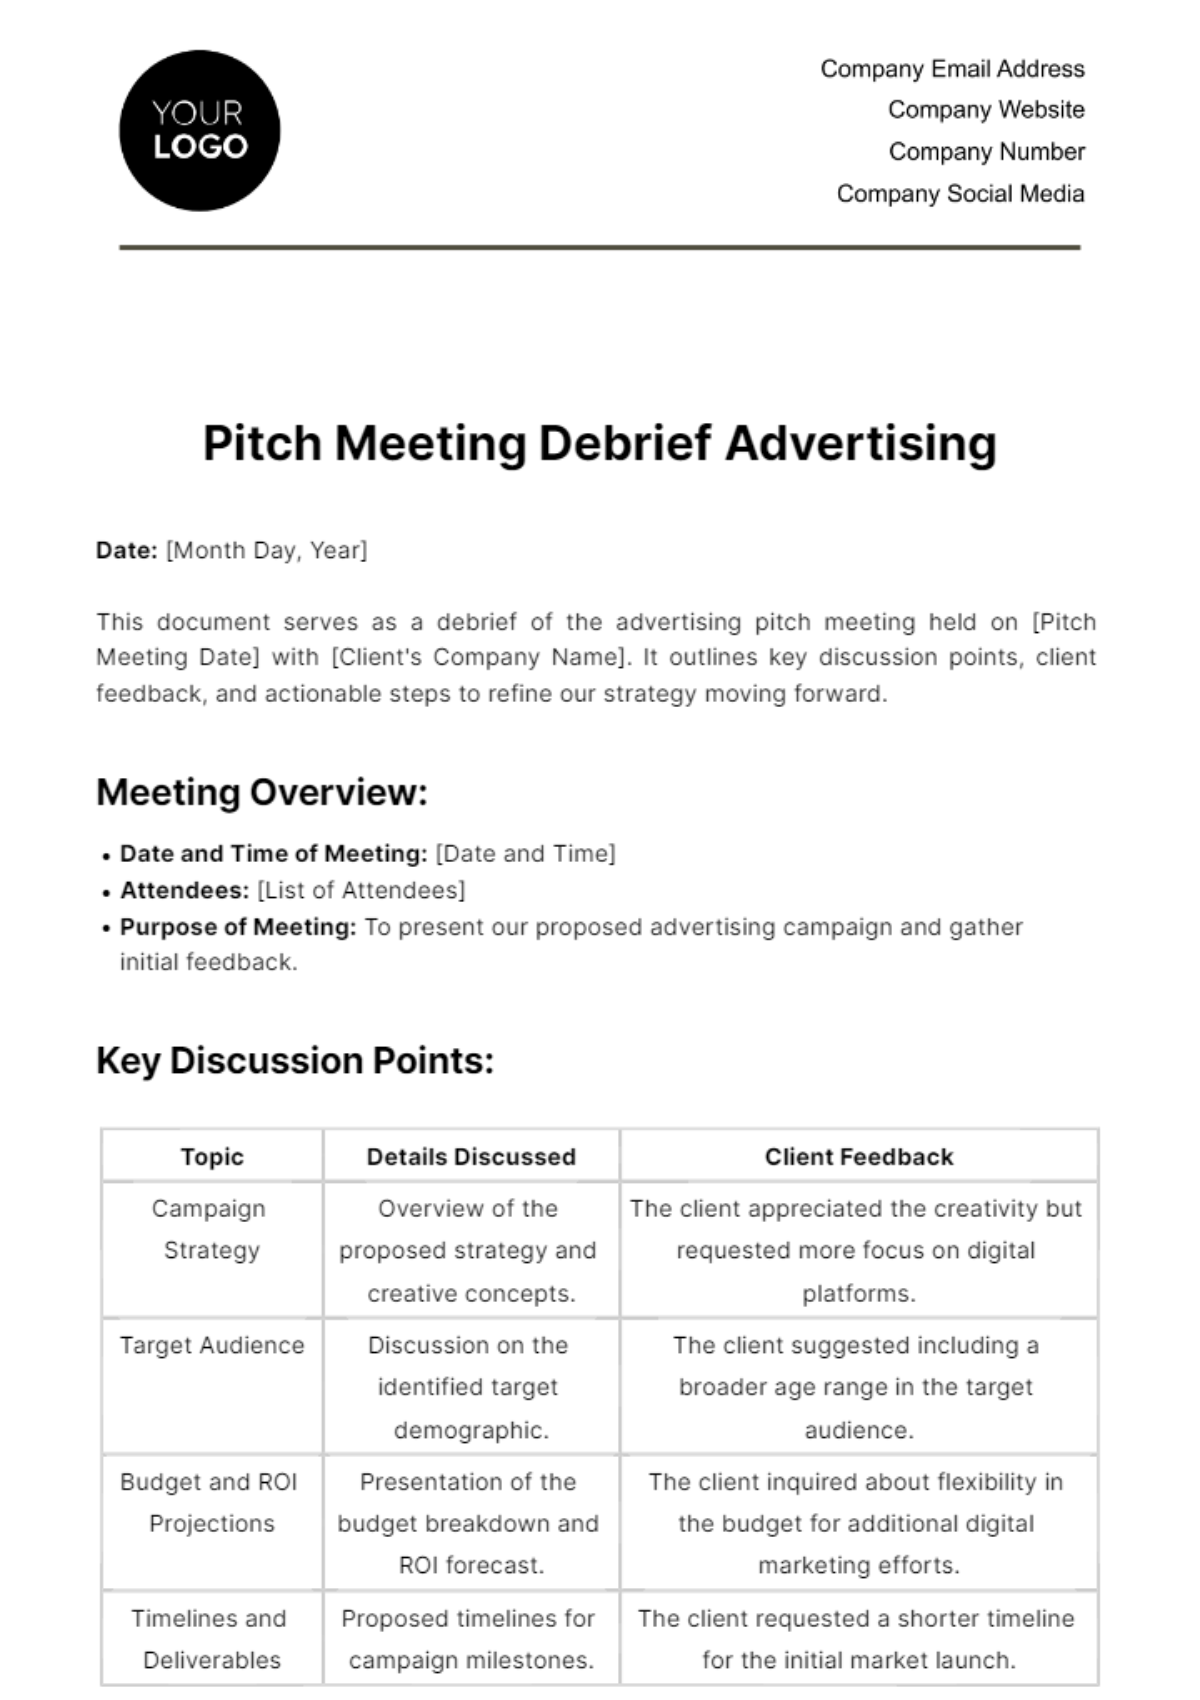 Free Pitch Meeting Debrief Advertising Template